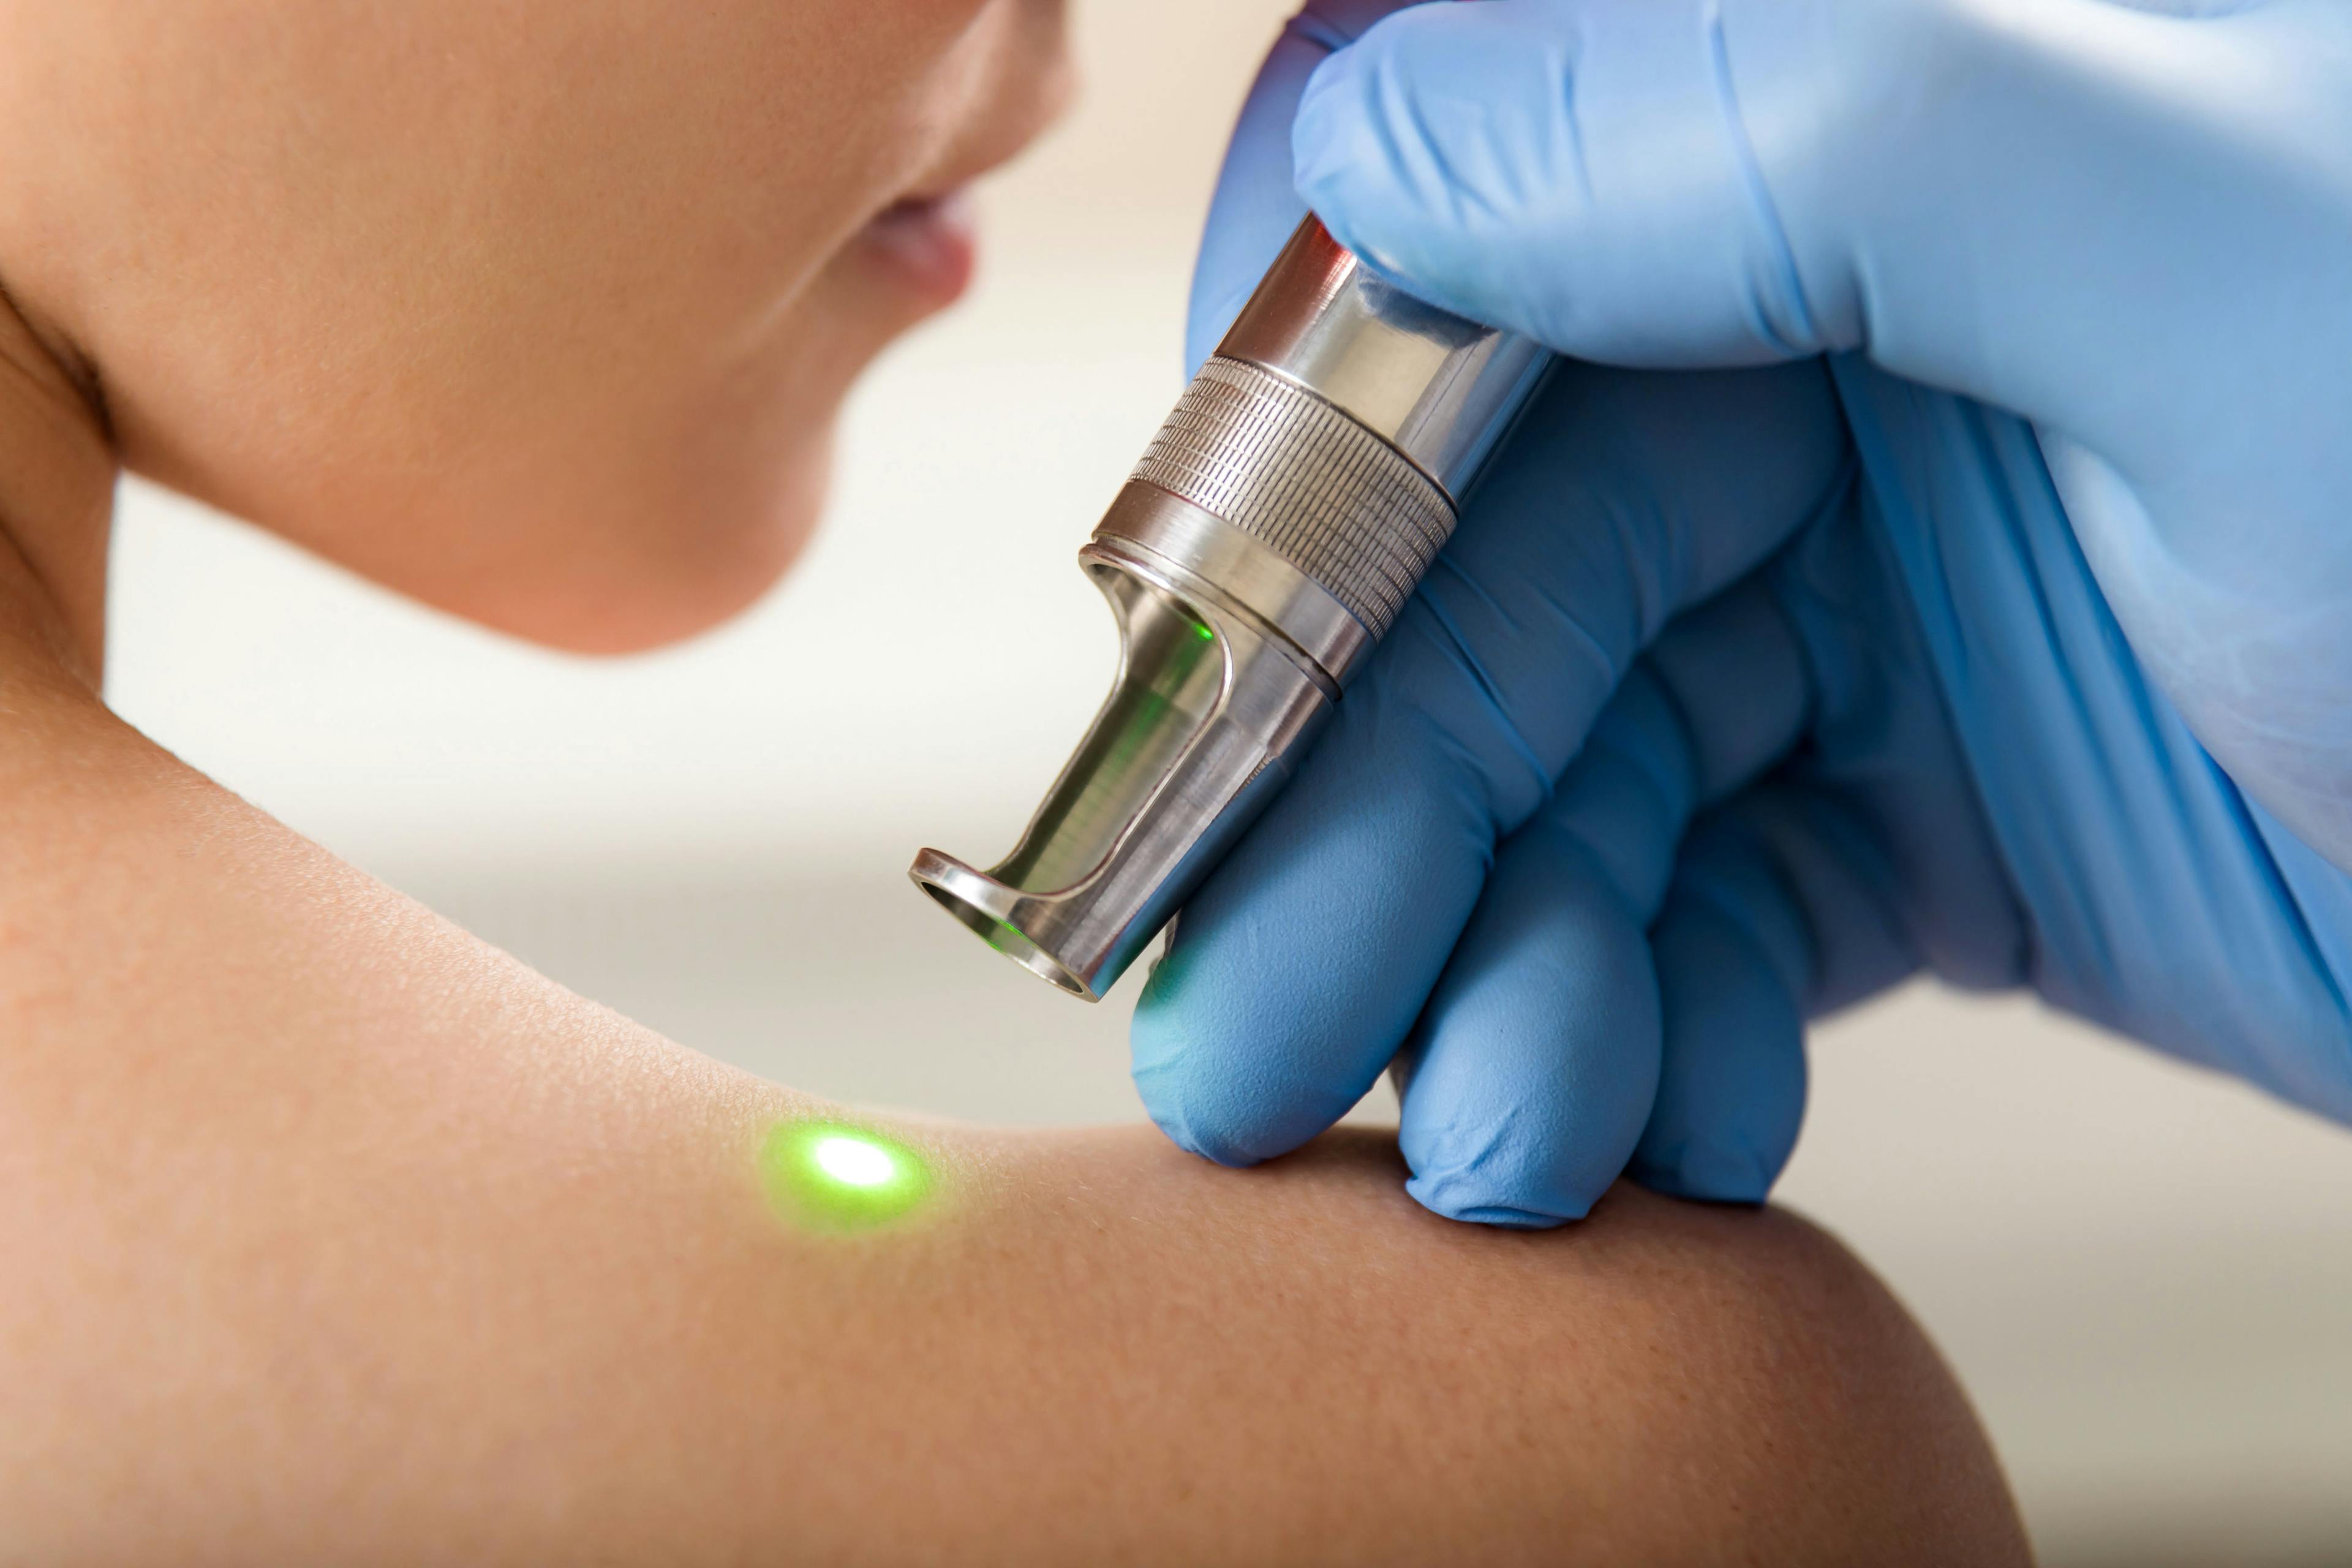 5 Perspectives on Laser Treatment in Dermatology